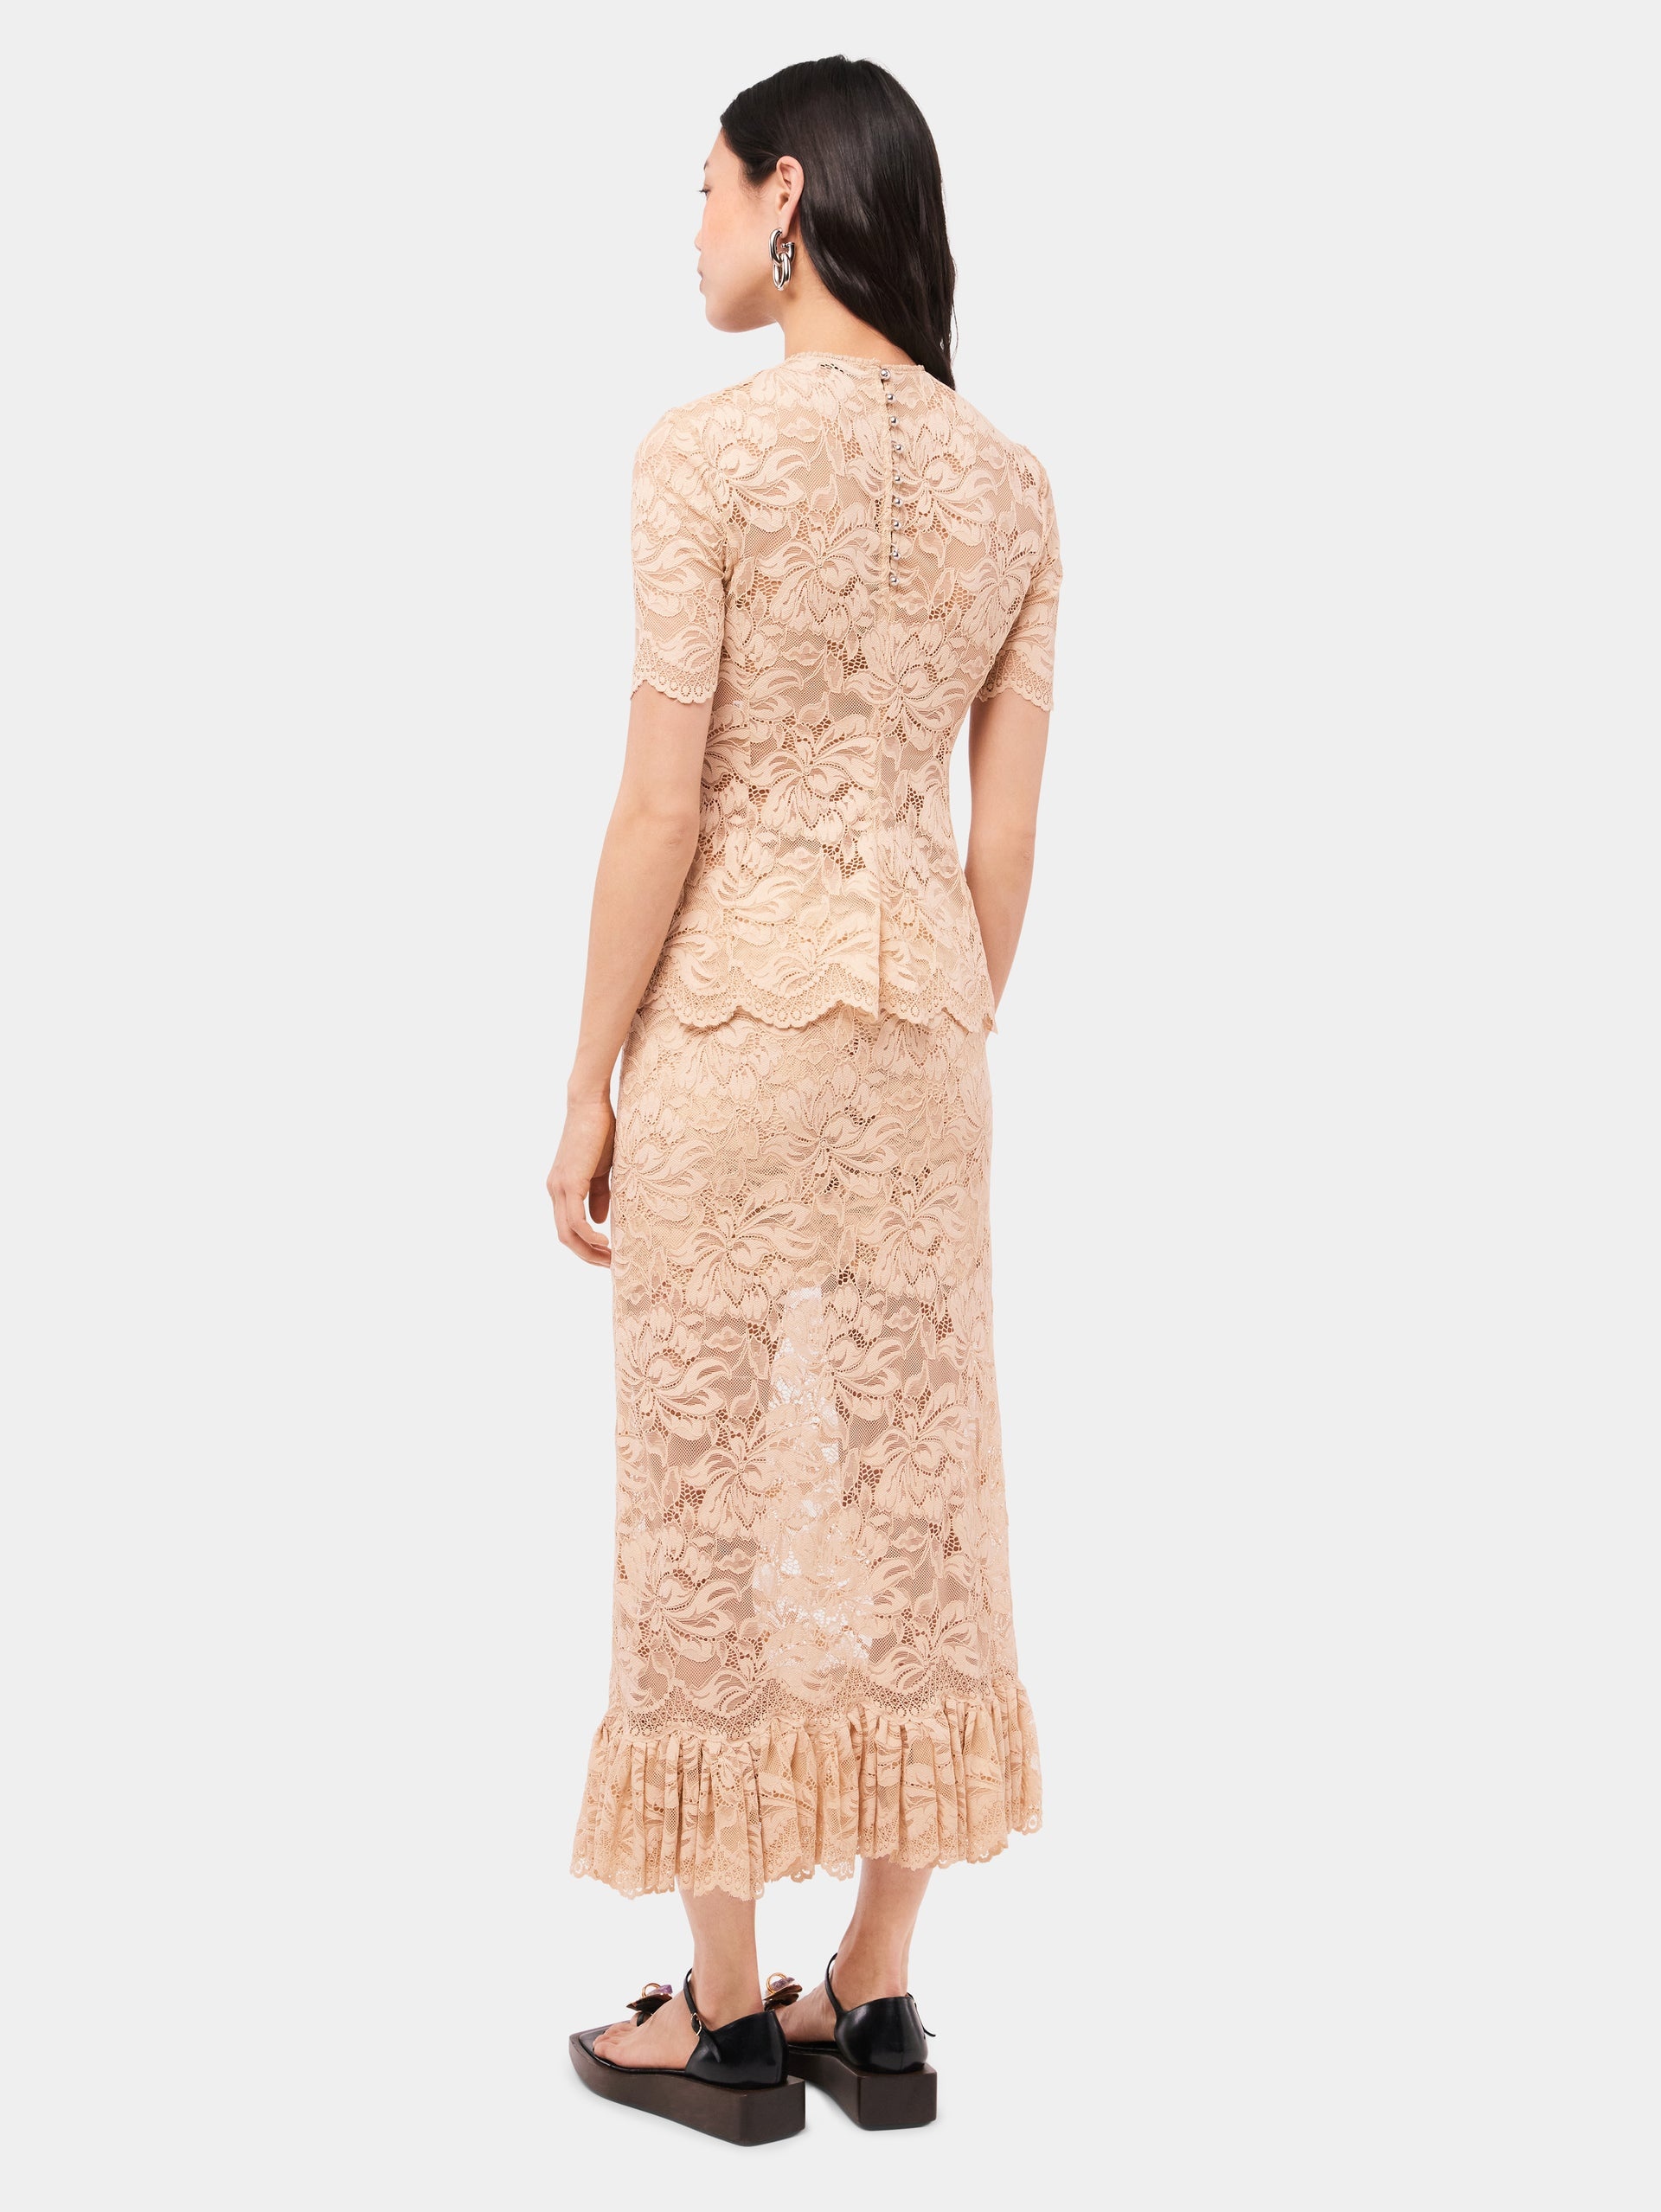 LONG RAFFIA COLORED SKIRT IN LACE - 4